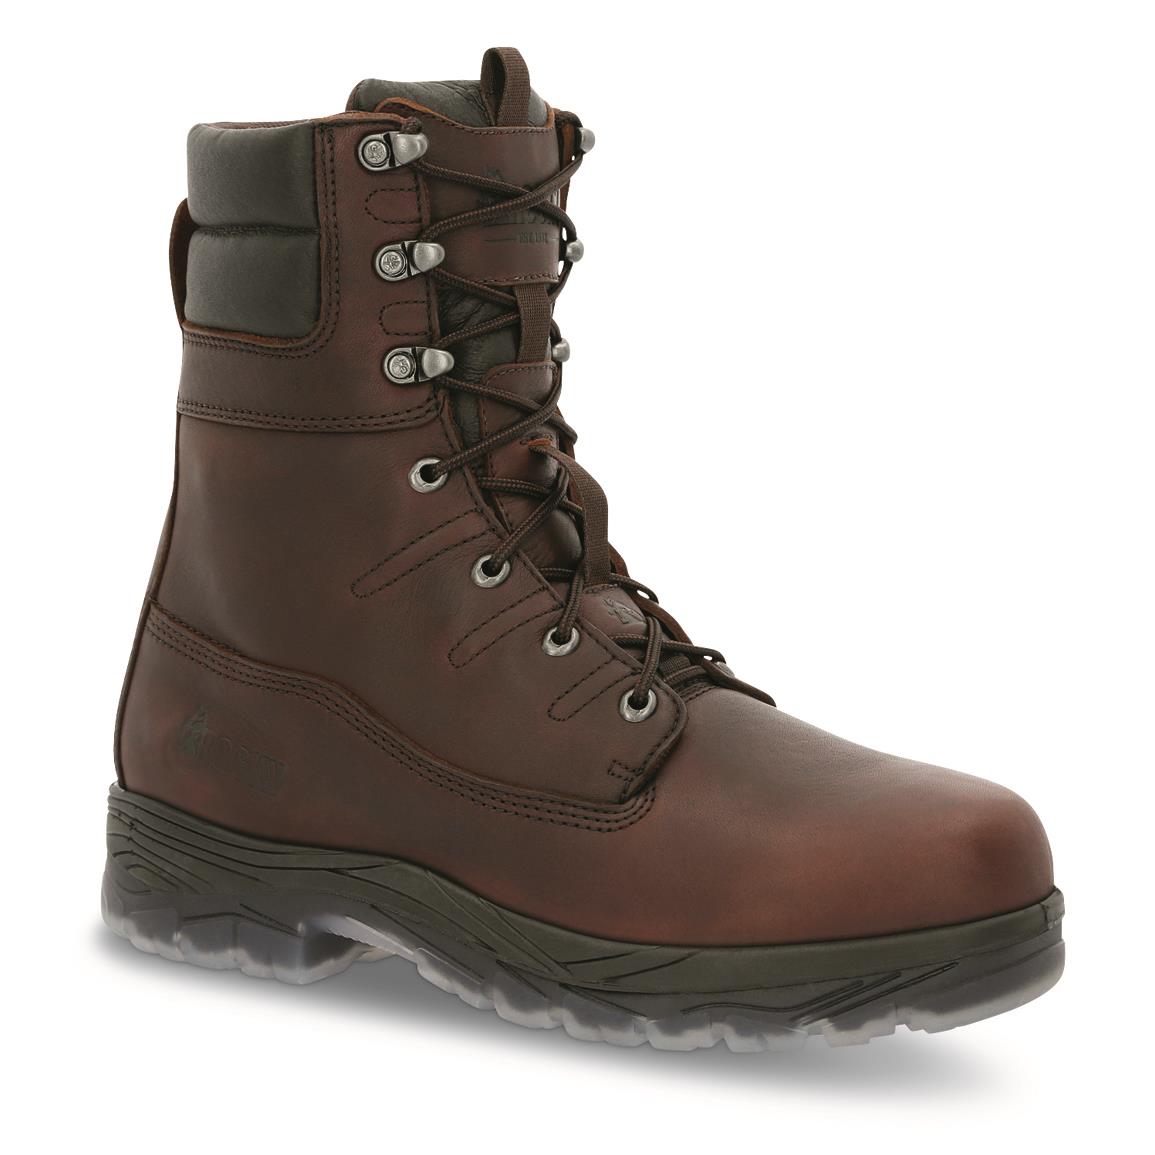 Rocky Men's Forge 8" Work Boots, Brown